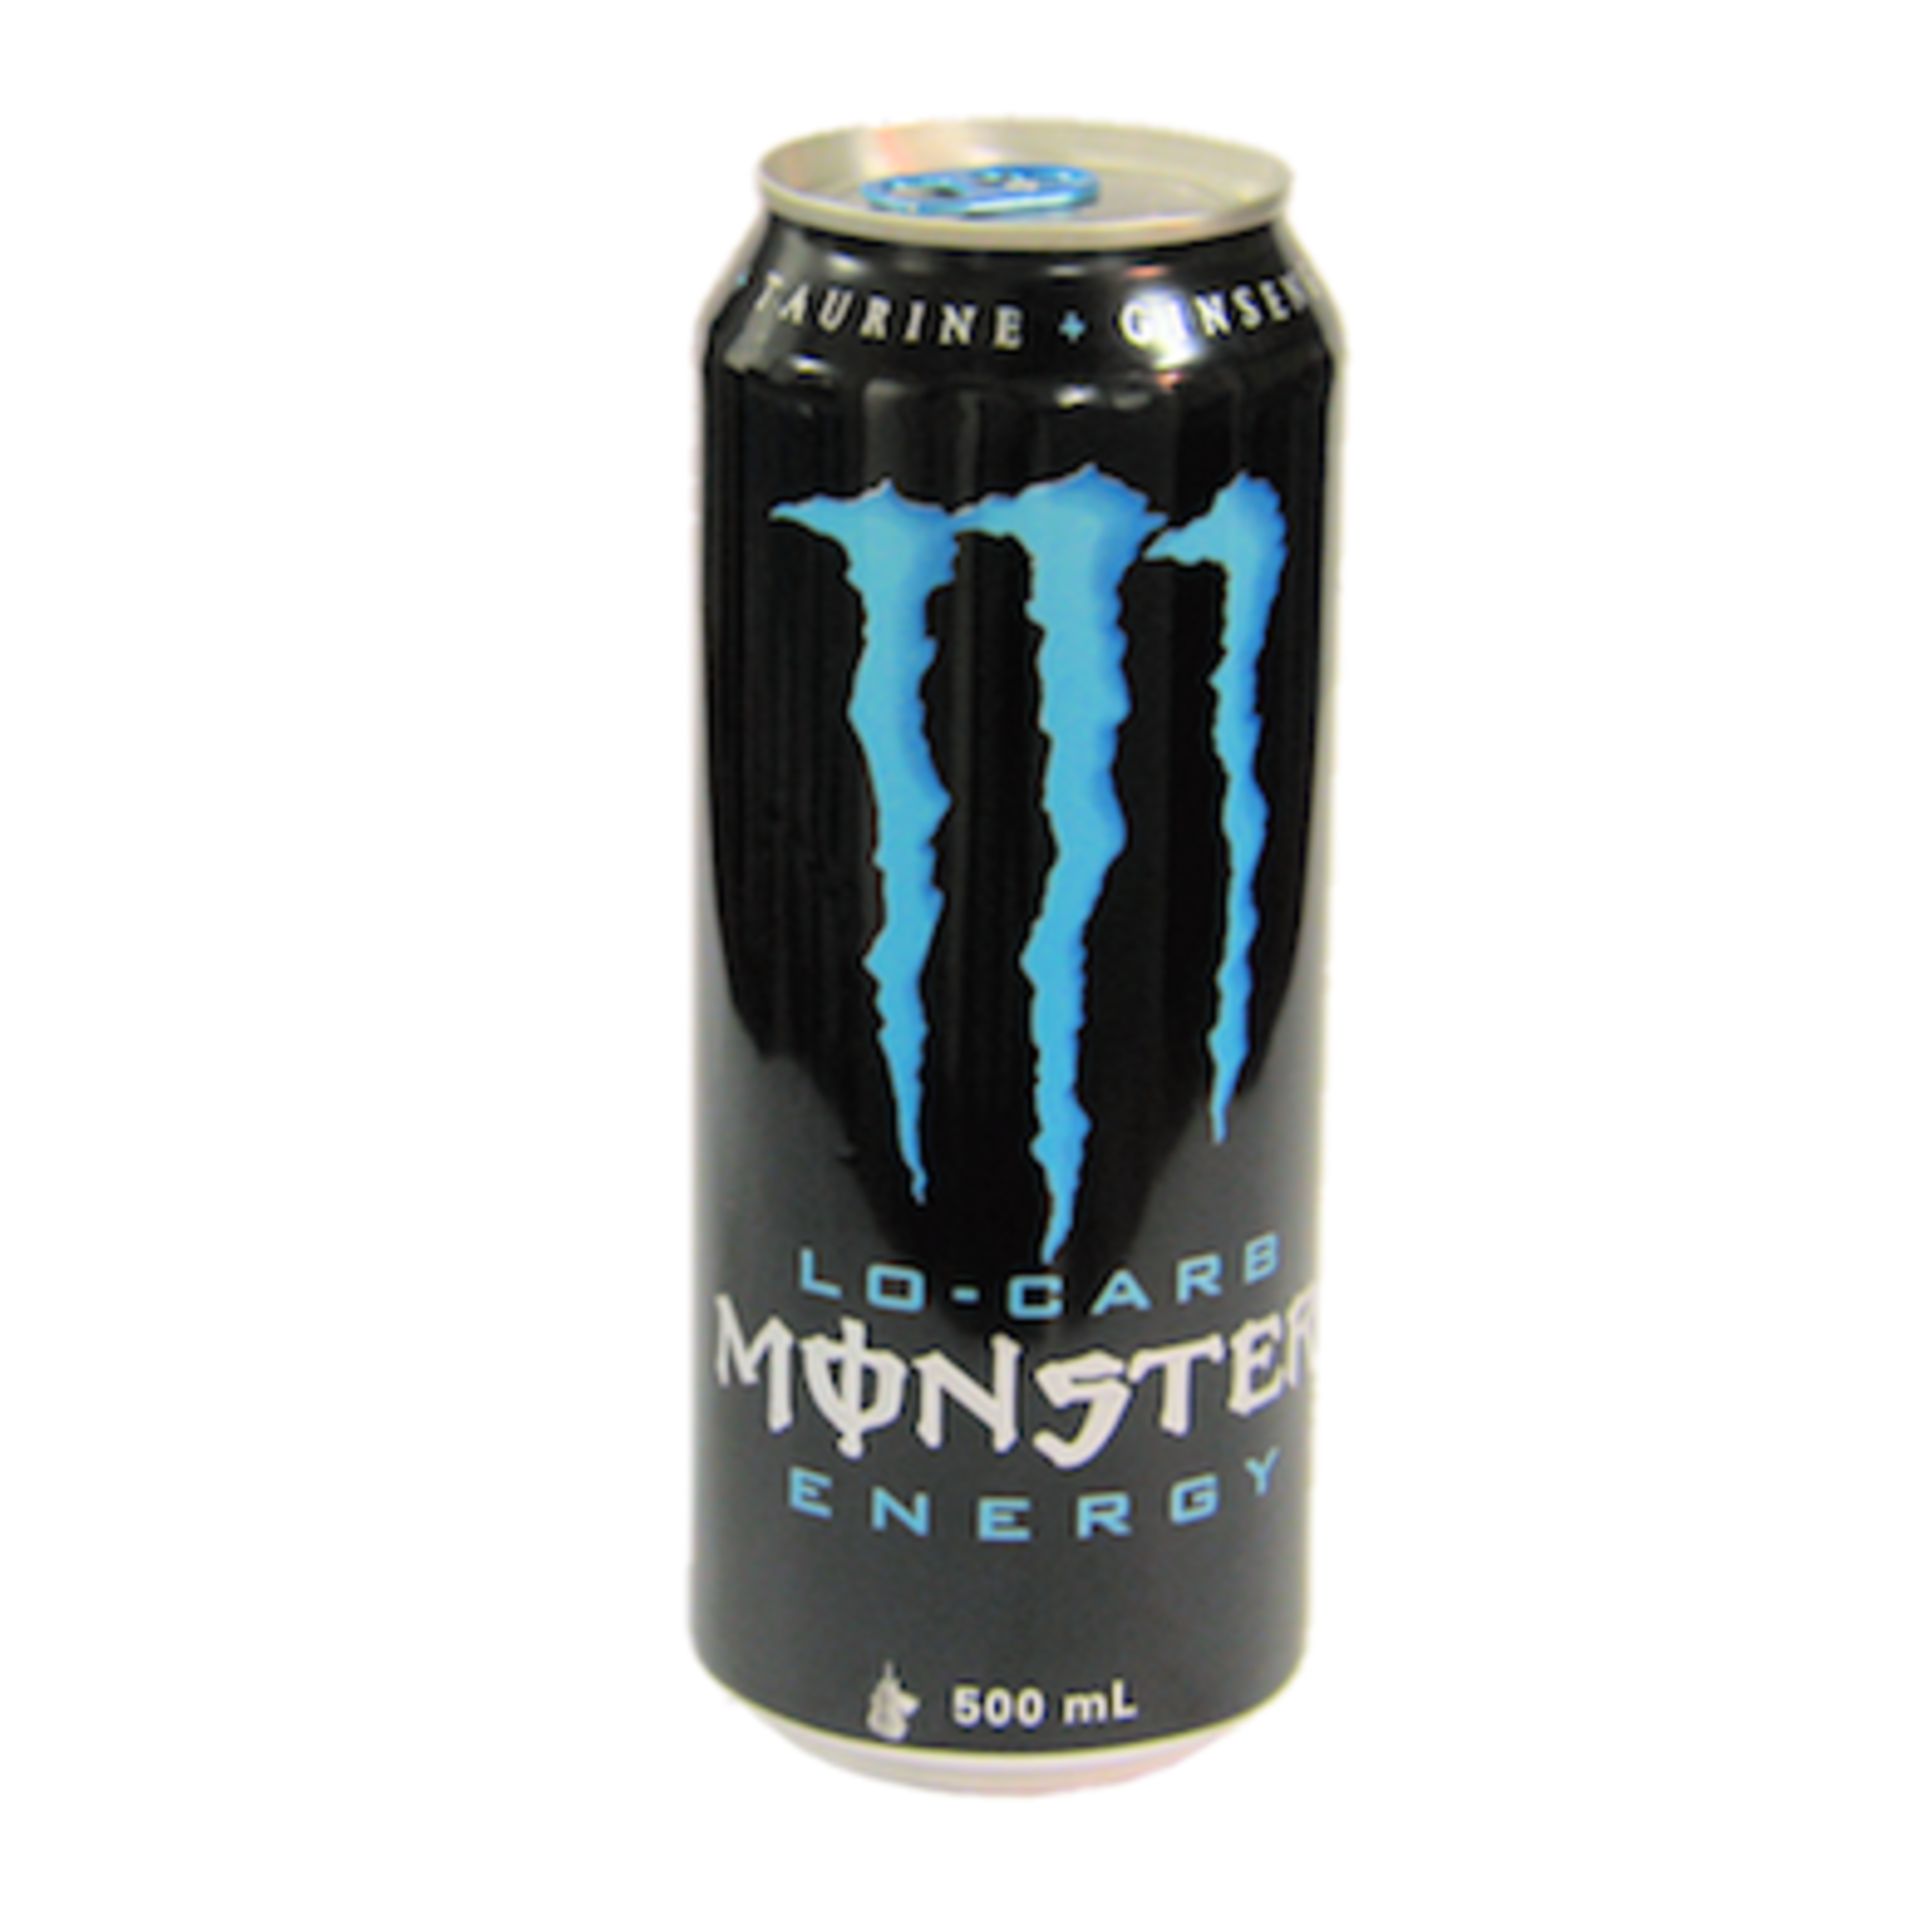 1,800 cans (75 cases of 24 cans) of Monster Lo-Carb Energy Drink.